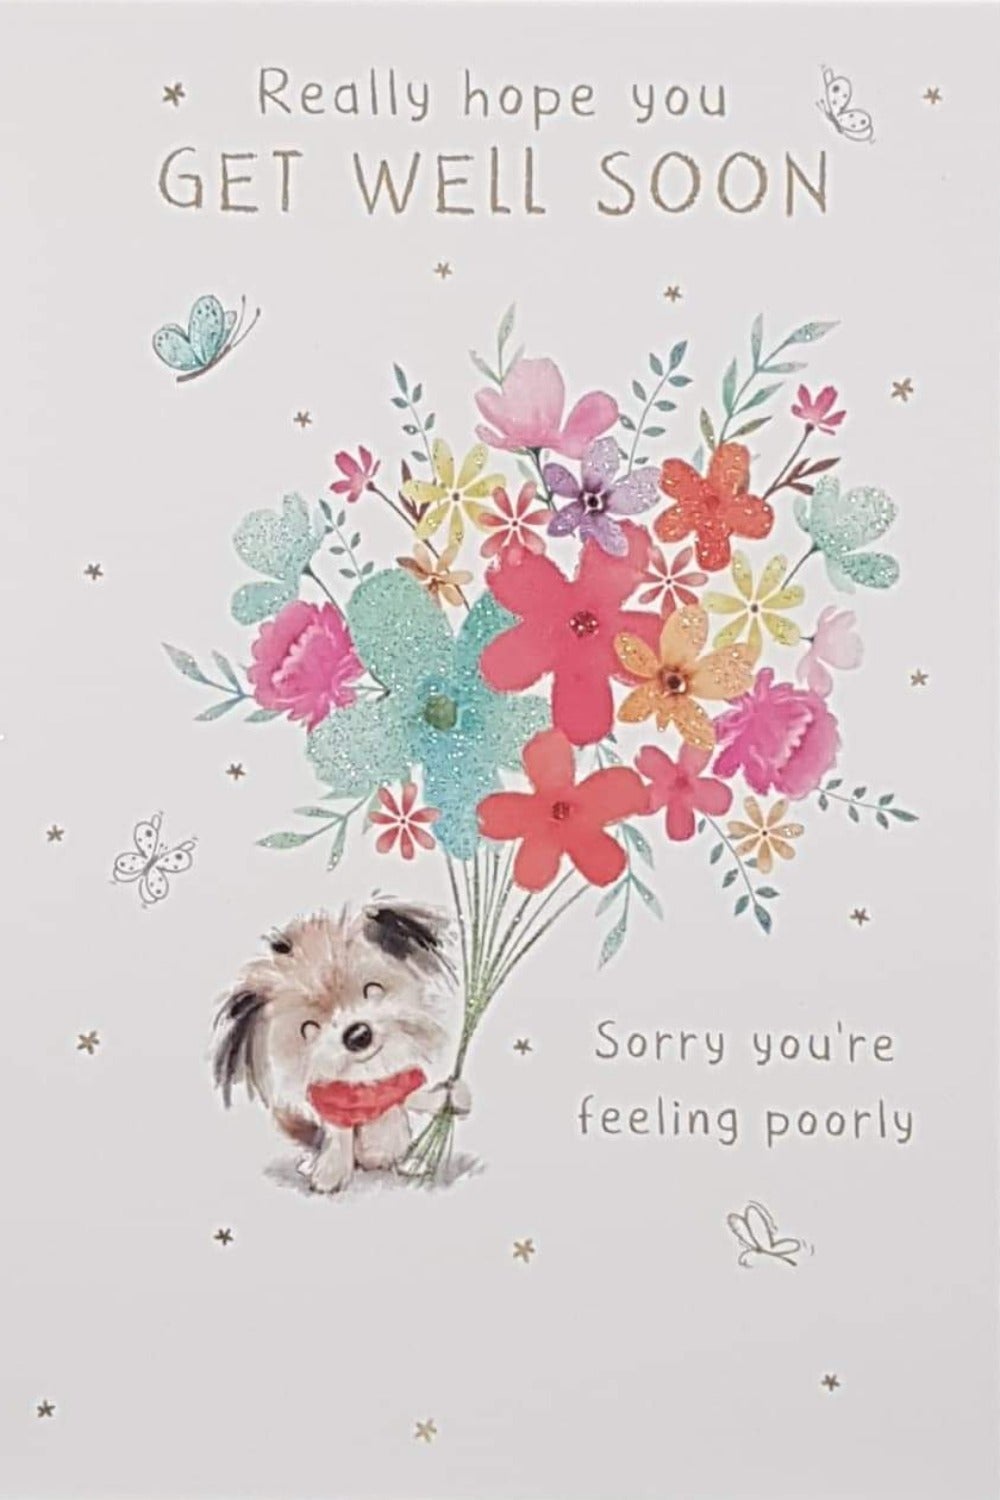 Get Well Card - 'Sorry You're Feeling Poorly' & A Sweet Puppy